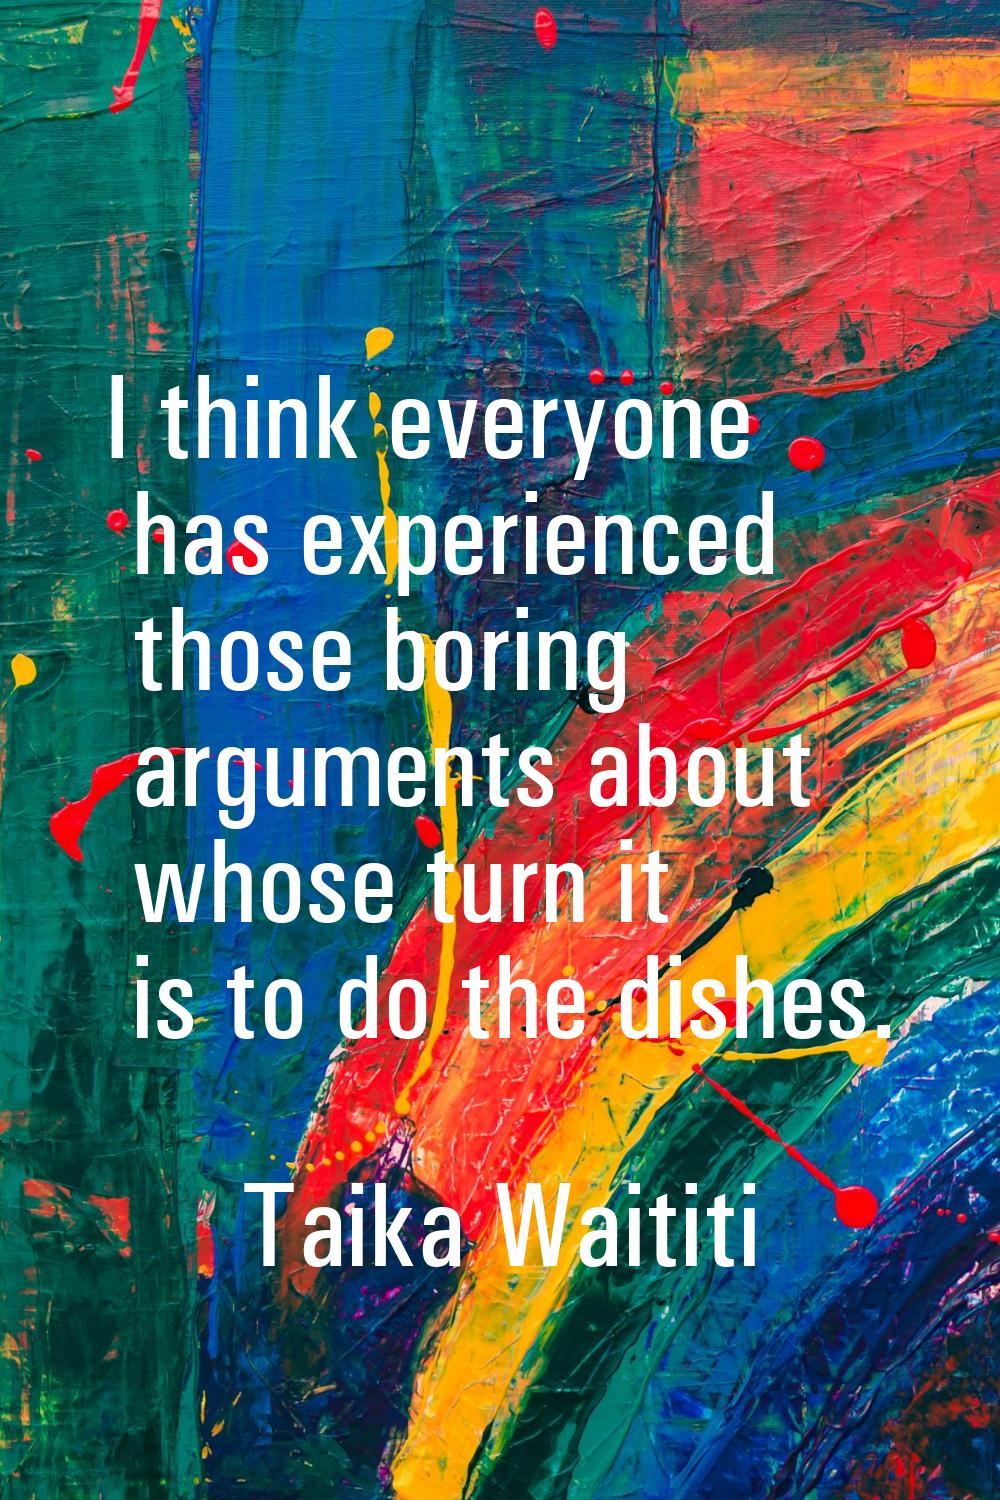 I think everyone has experienced those boring arguments about whose turn it is to do the dishes.